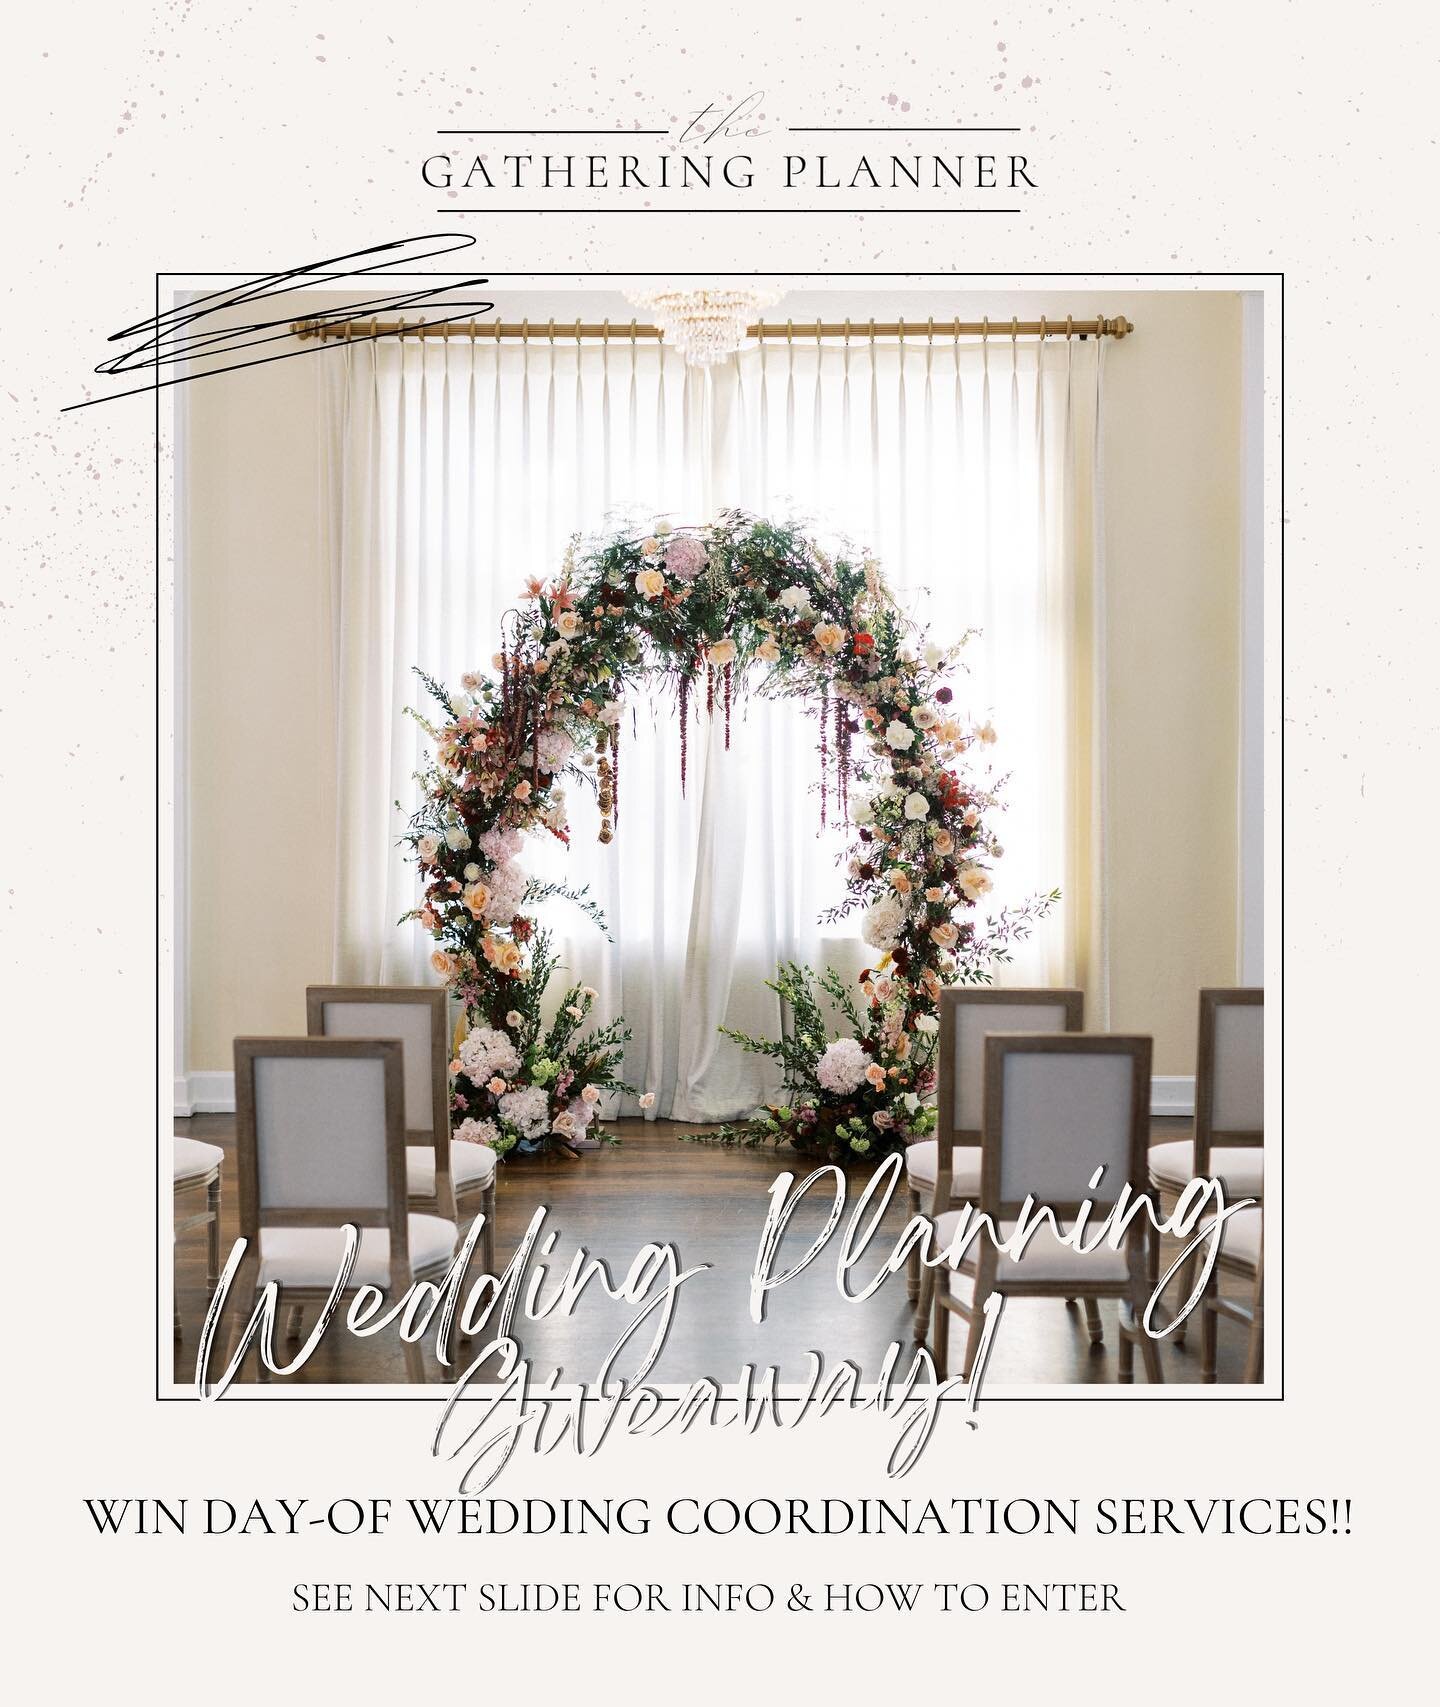 WE&rsquo;RE STARTING OFF THIS WEEK WITH A SPECIAL ANNOUNCEMENT 👏🏻

WEDDING GIVEAWAY✨ 

One amazing couple will be chosen at random for a chance to win A FREE DAY OF COORDINATING PACKAGE! 

Rules for giveaway

1. Must be getting married between May 